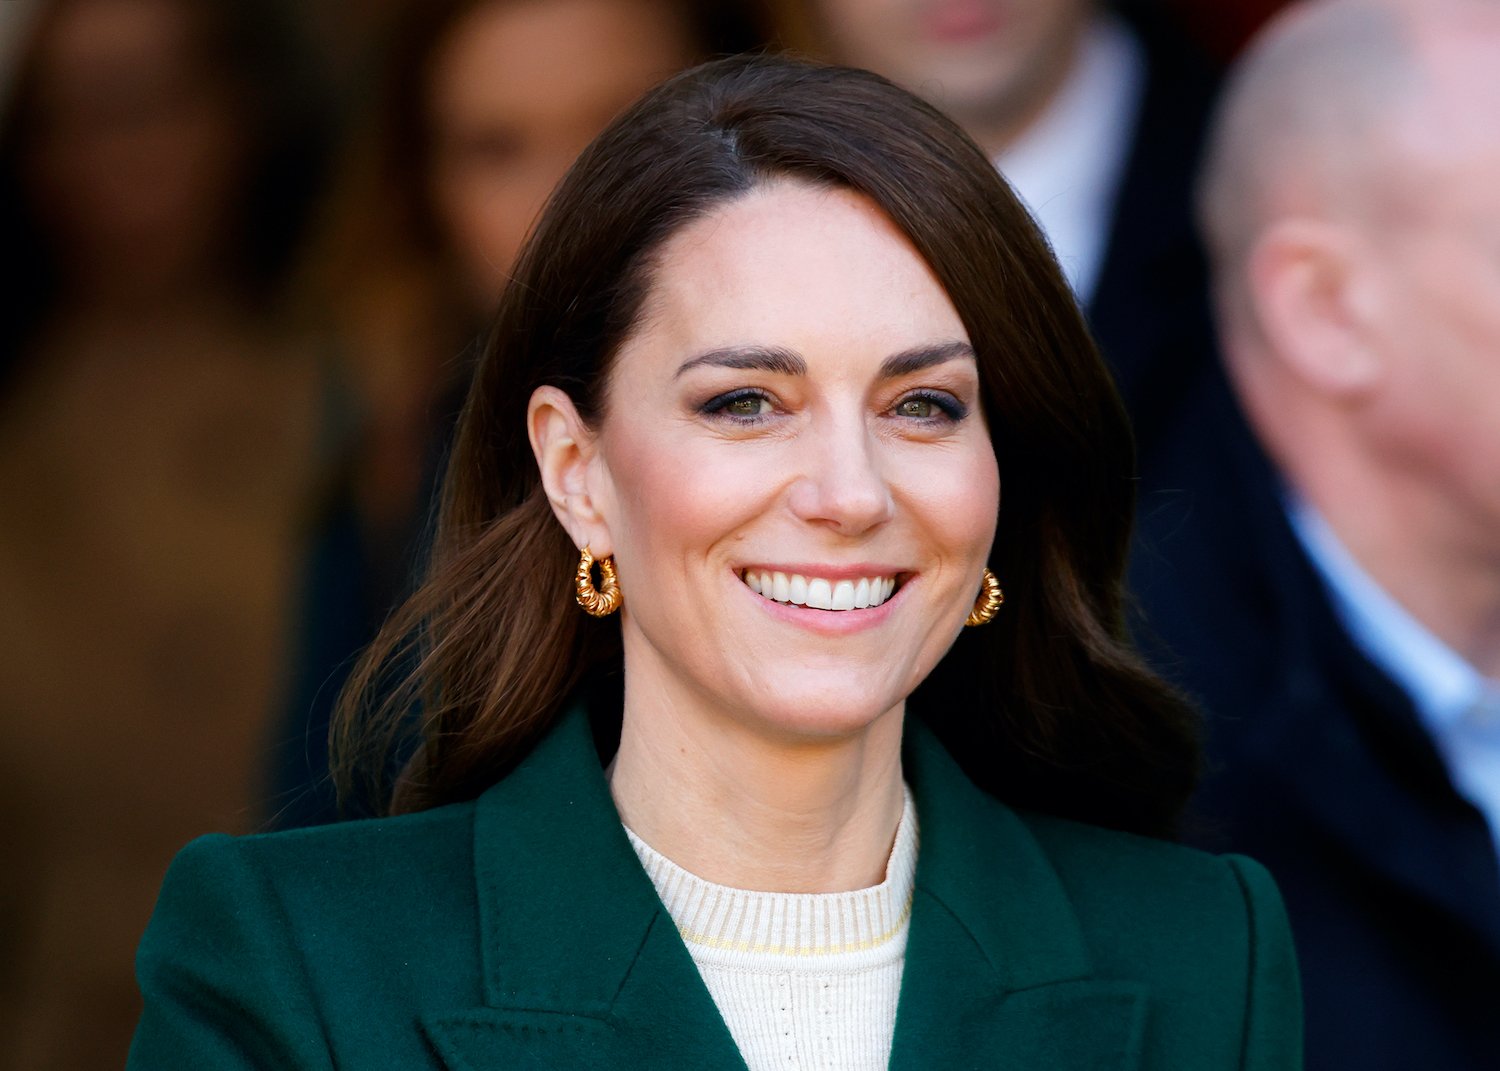 Kate Middleton Had the Perfect Response When a Nervous Fan Wanted to Take a Selfie With Her